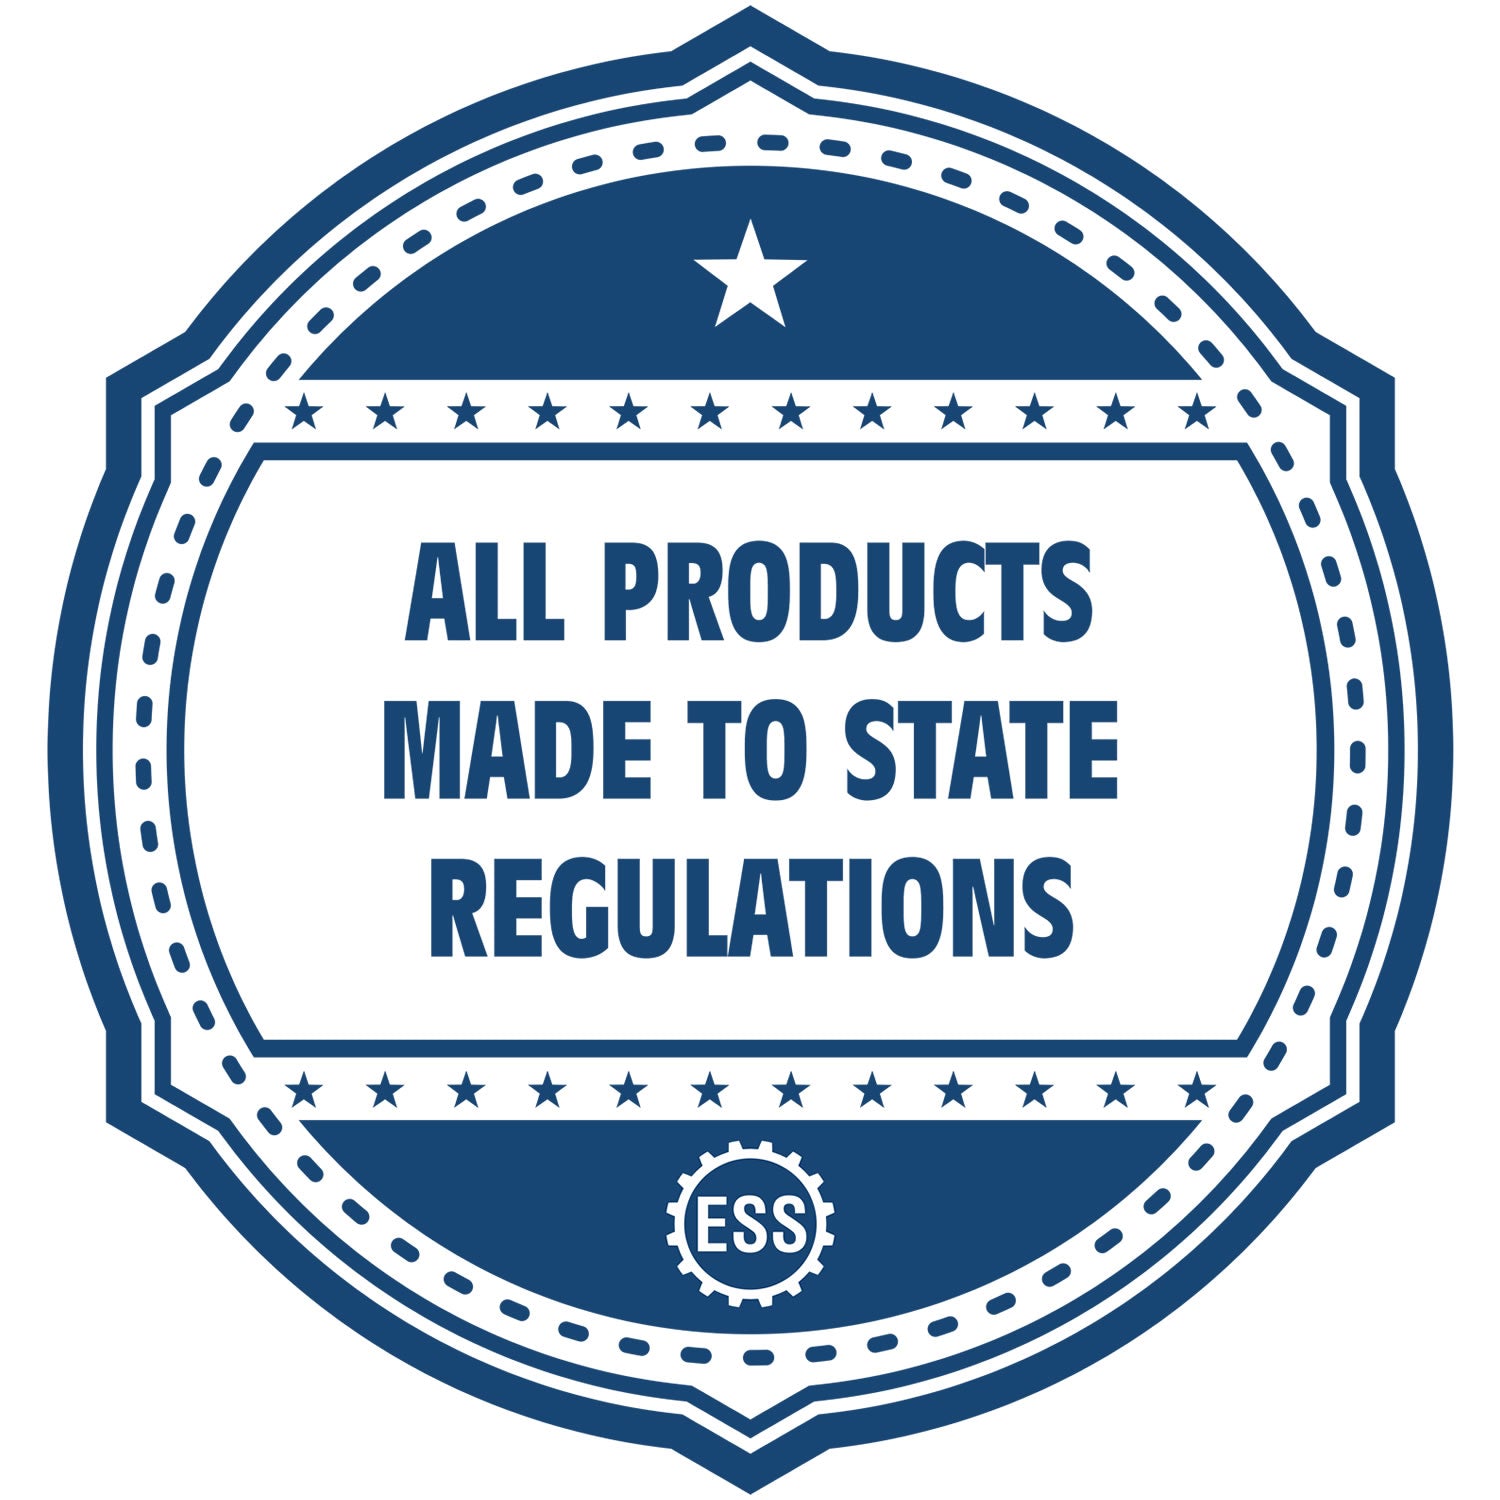 An icon or badge element for the Self-Inking Michigan Landscape Architect Stamp showing that this product is made in compliance with state regulations.